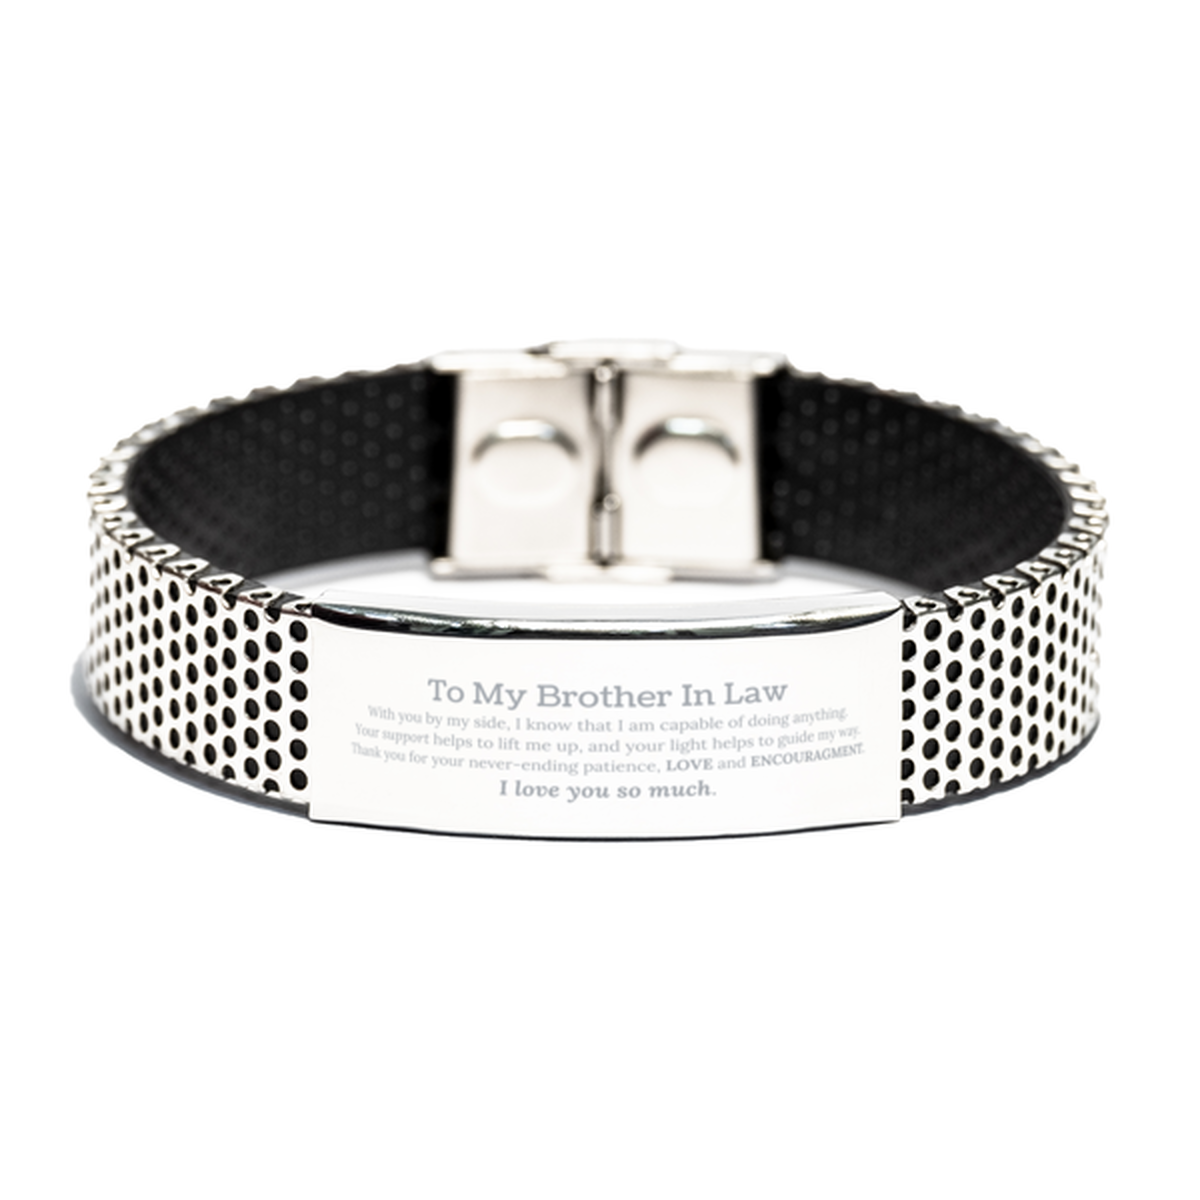 Appreciation Brother In Law Stainless Steel Bracelet Gifts, To My Brother In Law Birthday Christmas Wedding Keepsake Gifts for Brother In Law With you by my side, I know that I am capable of doing anything. I love you so much